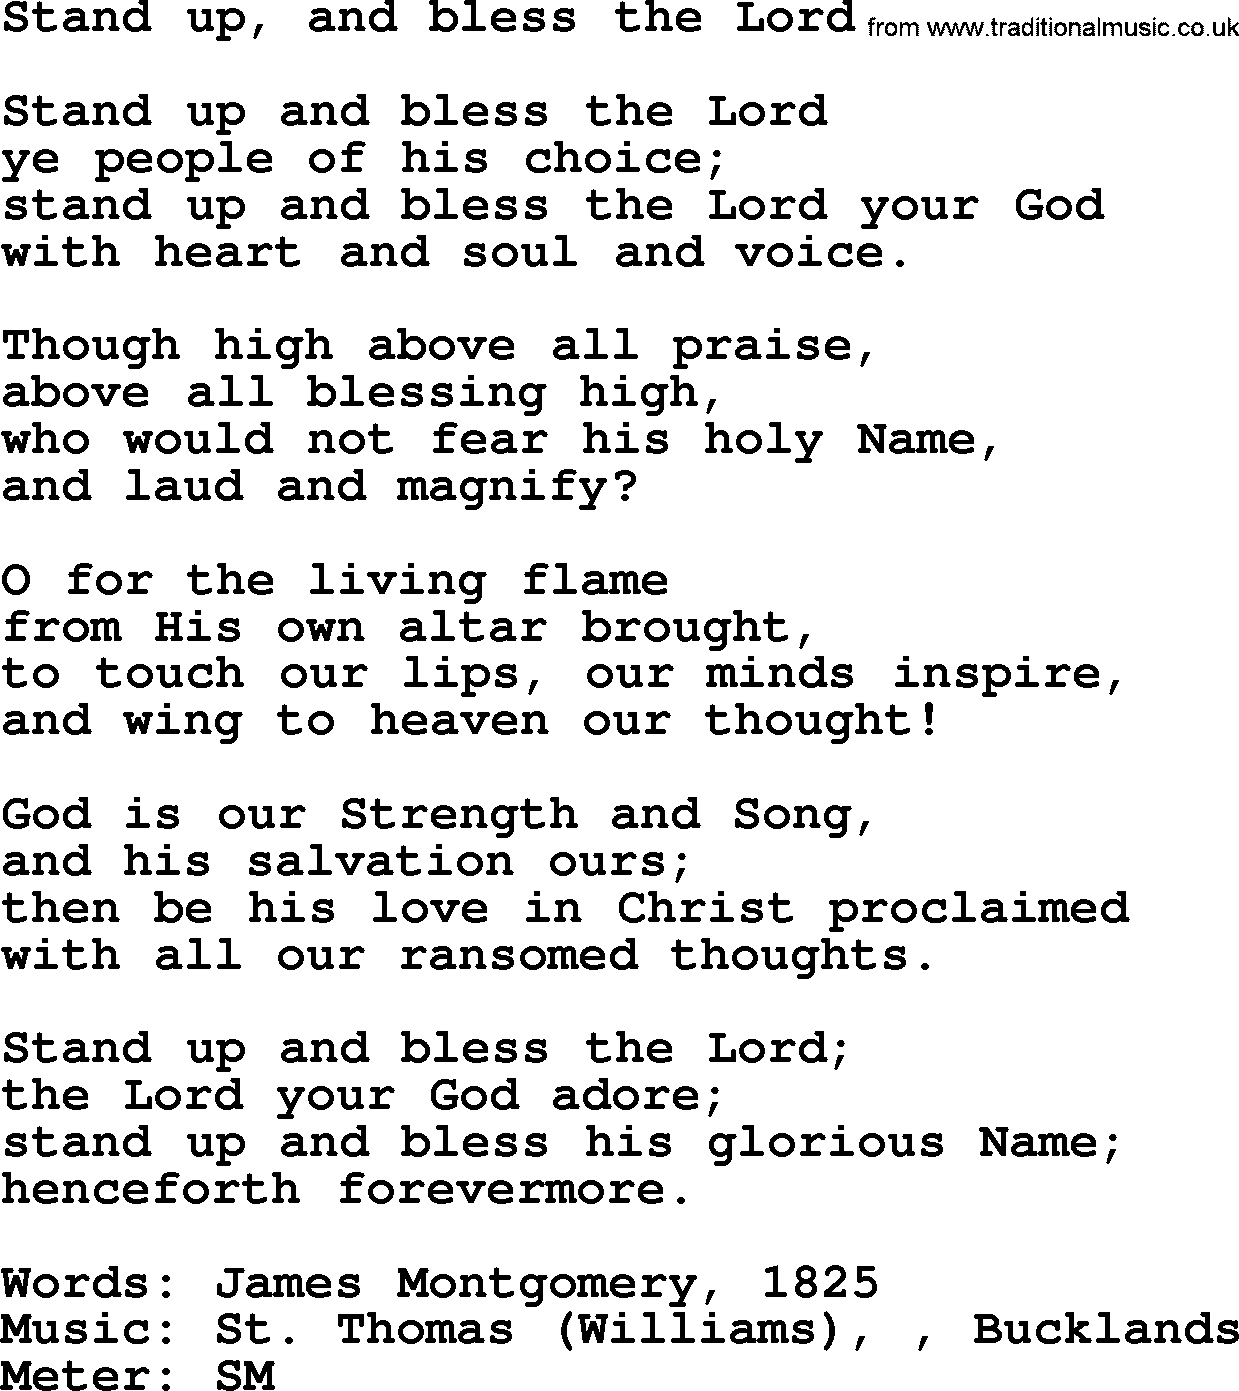 Thanksgiving Hymns and Songs: Stand Up, And Bless The Lord lyrics with PDF